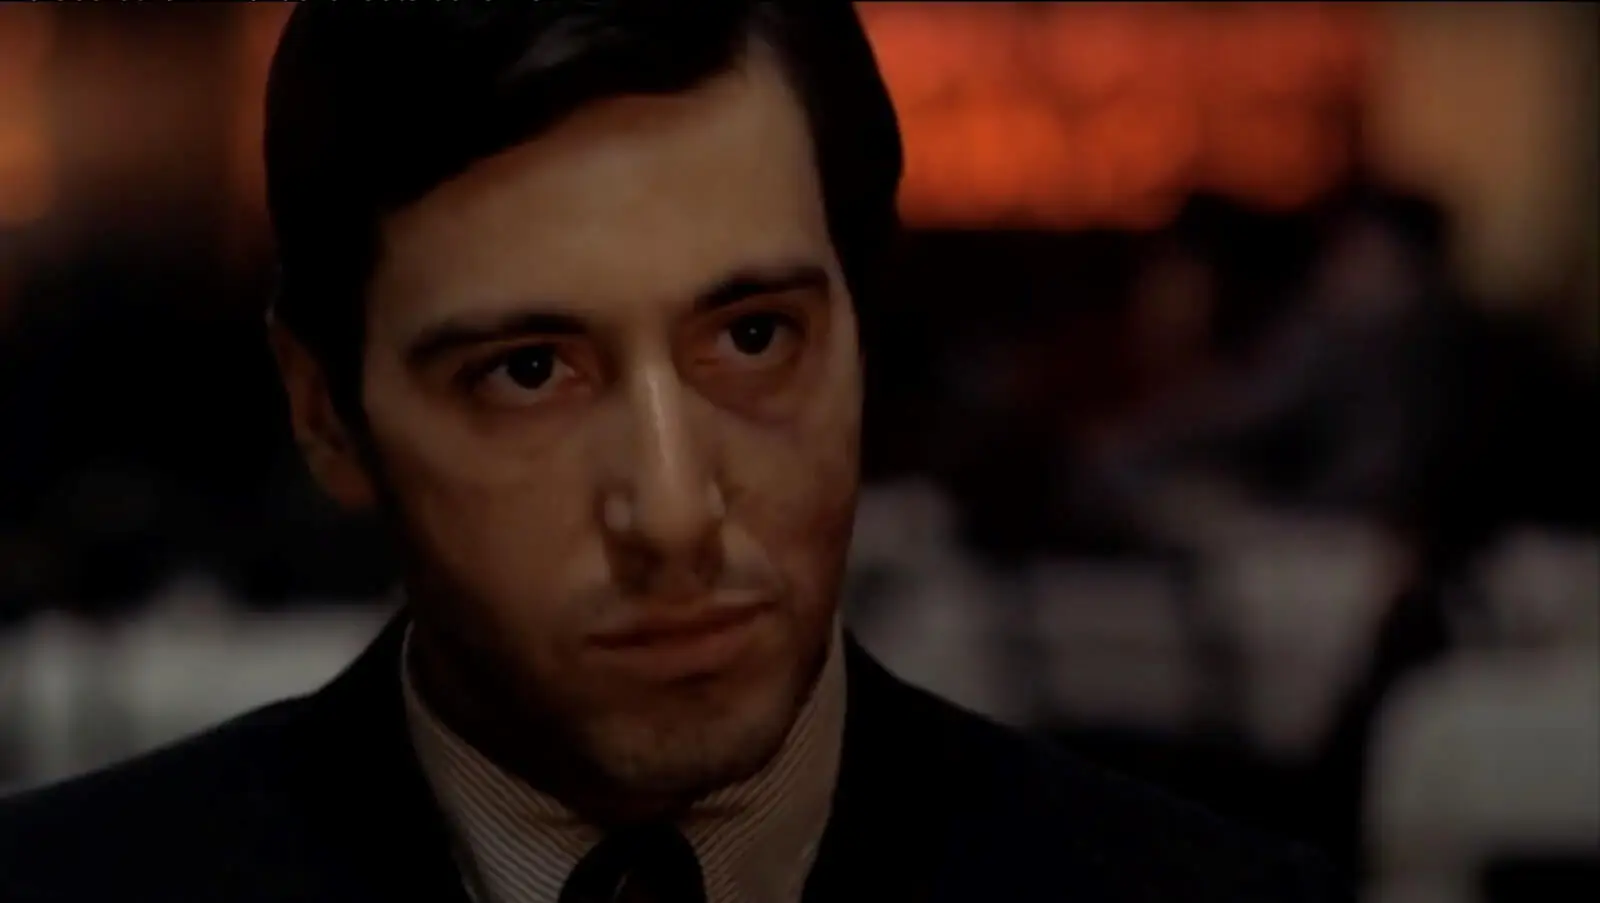 Character Driven Editing in The Godfather - Shot 10 - StudioBinder Shotlisting Software